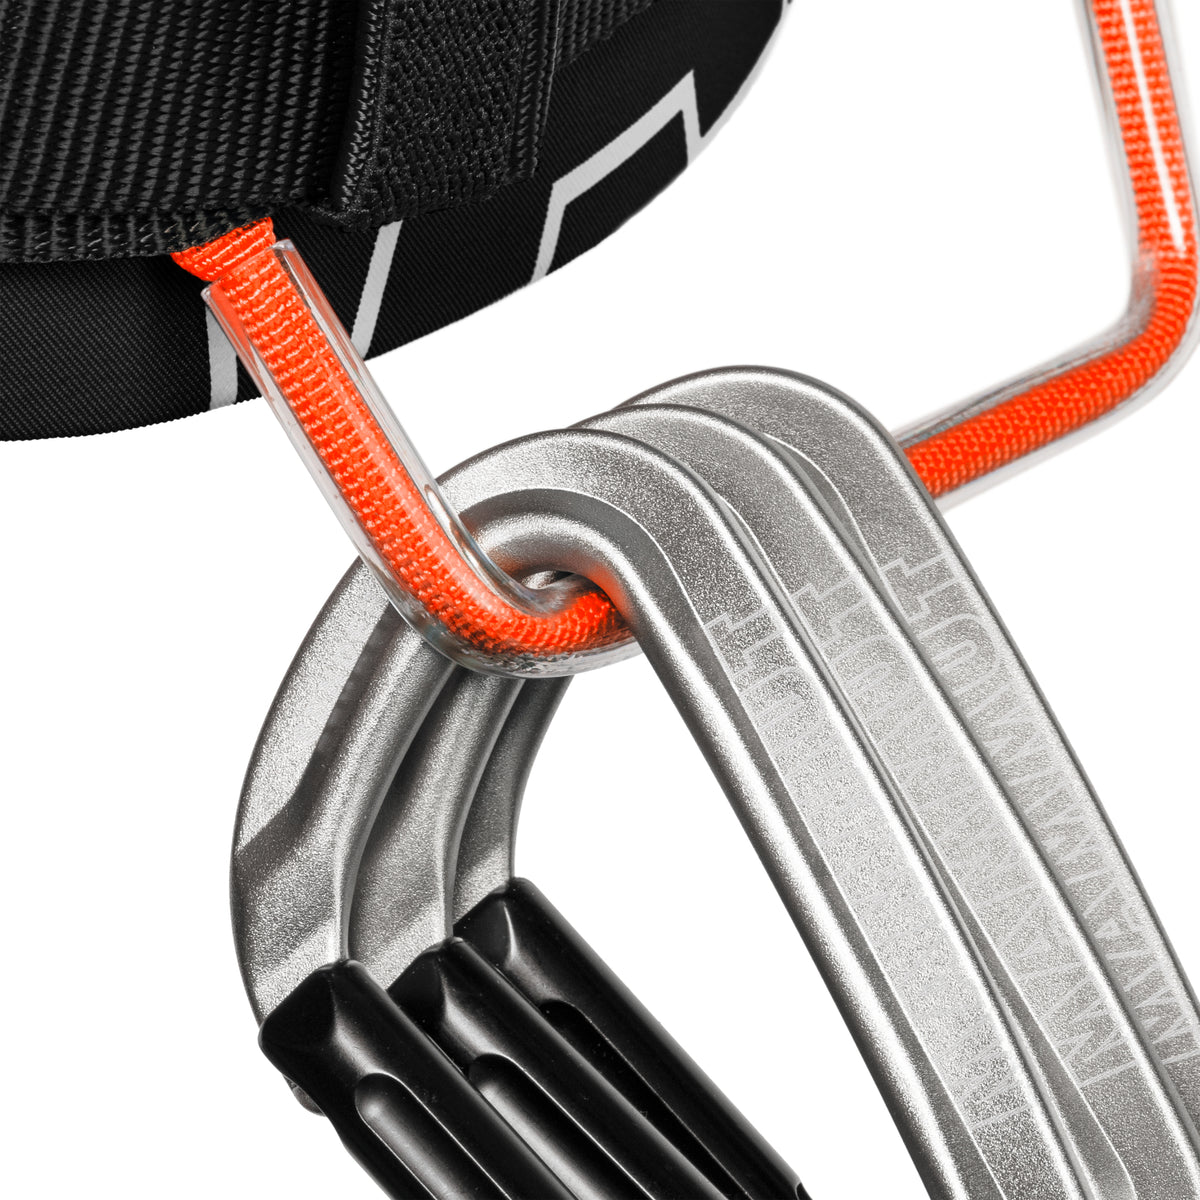 Mammut 4 Slide Harness with quickdraws attached